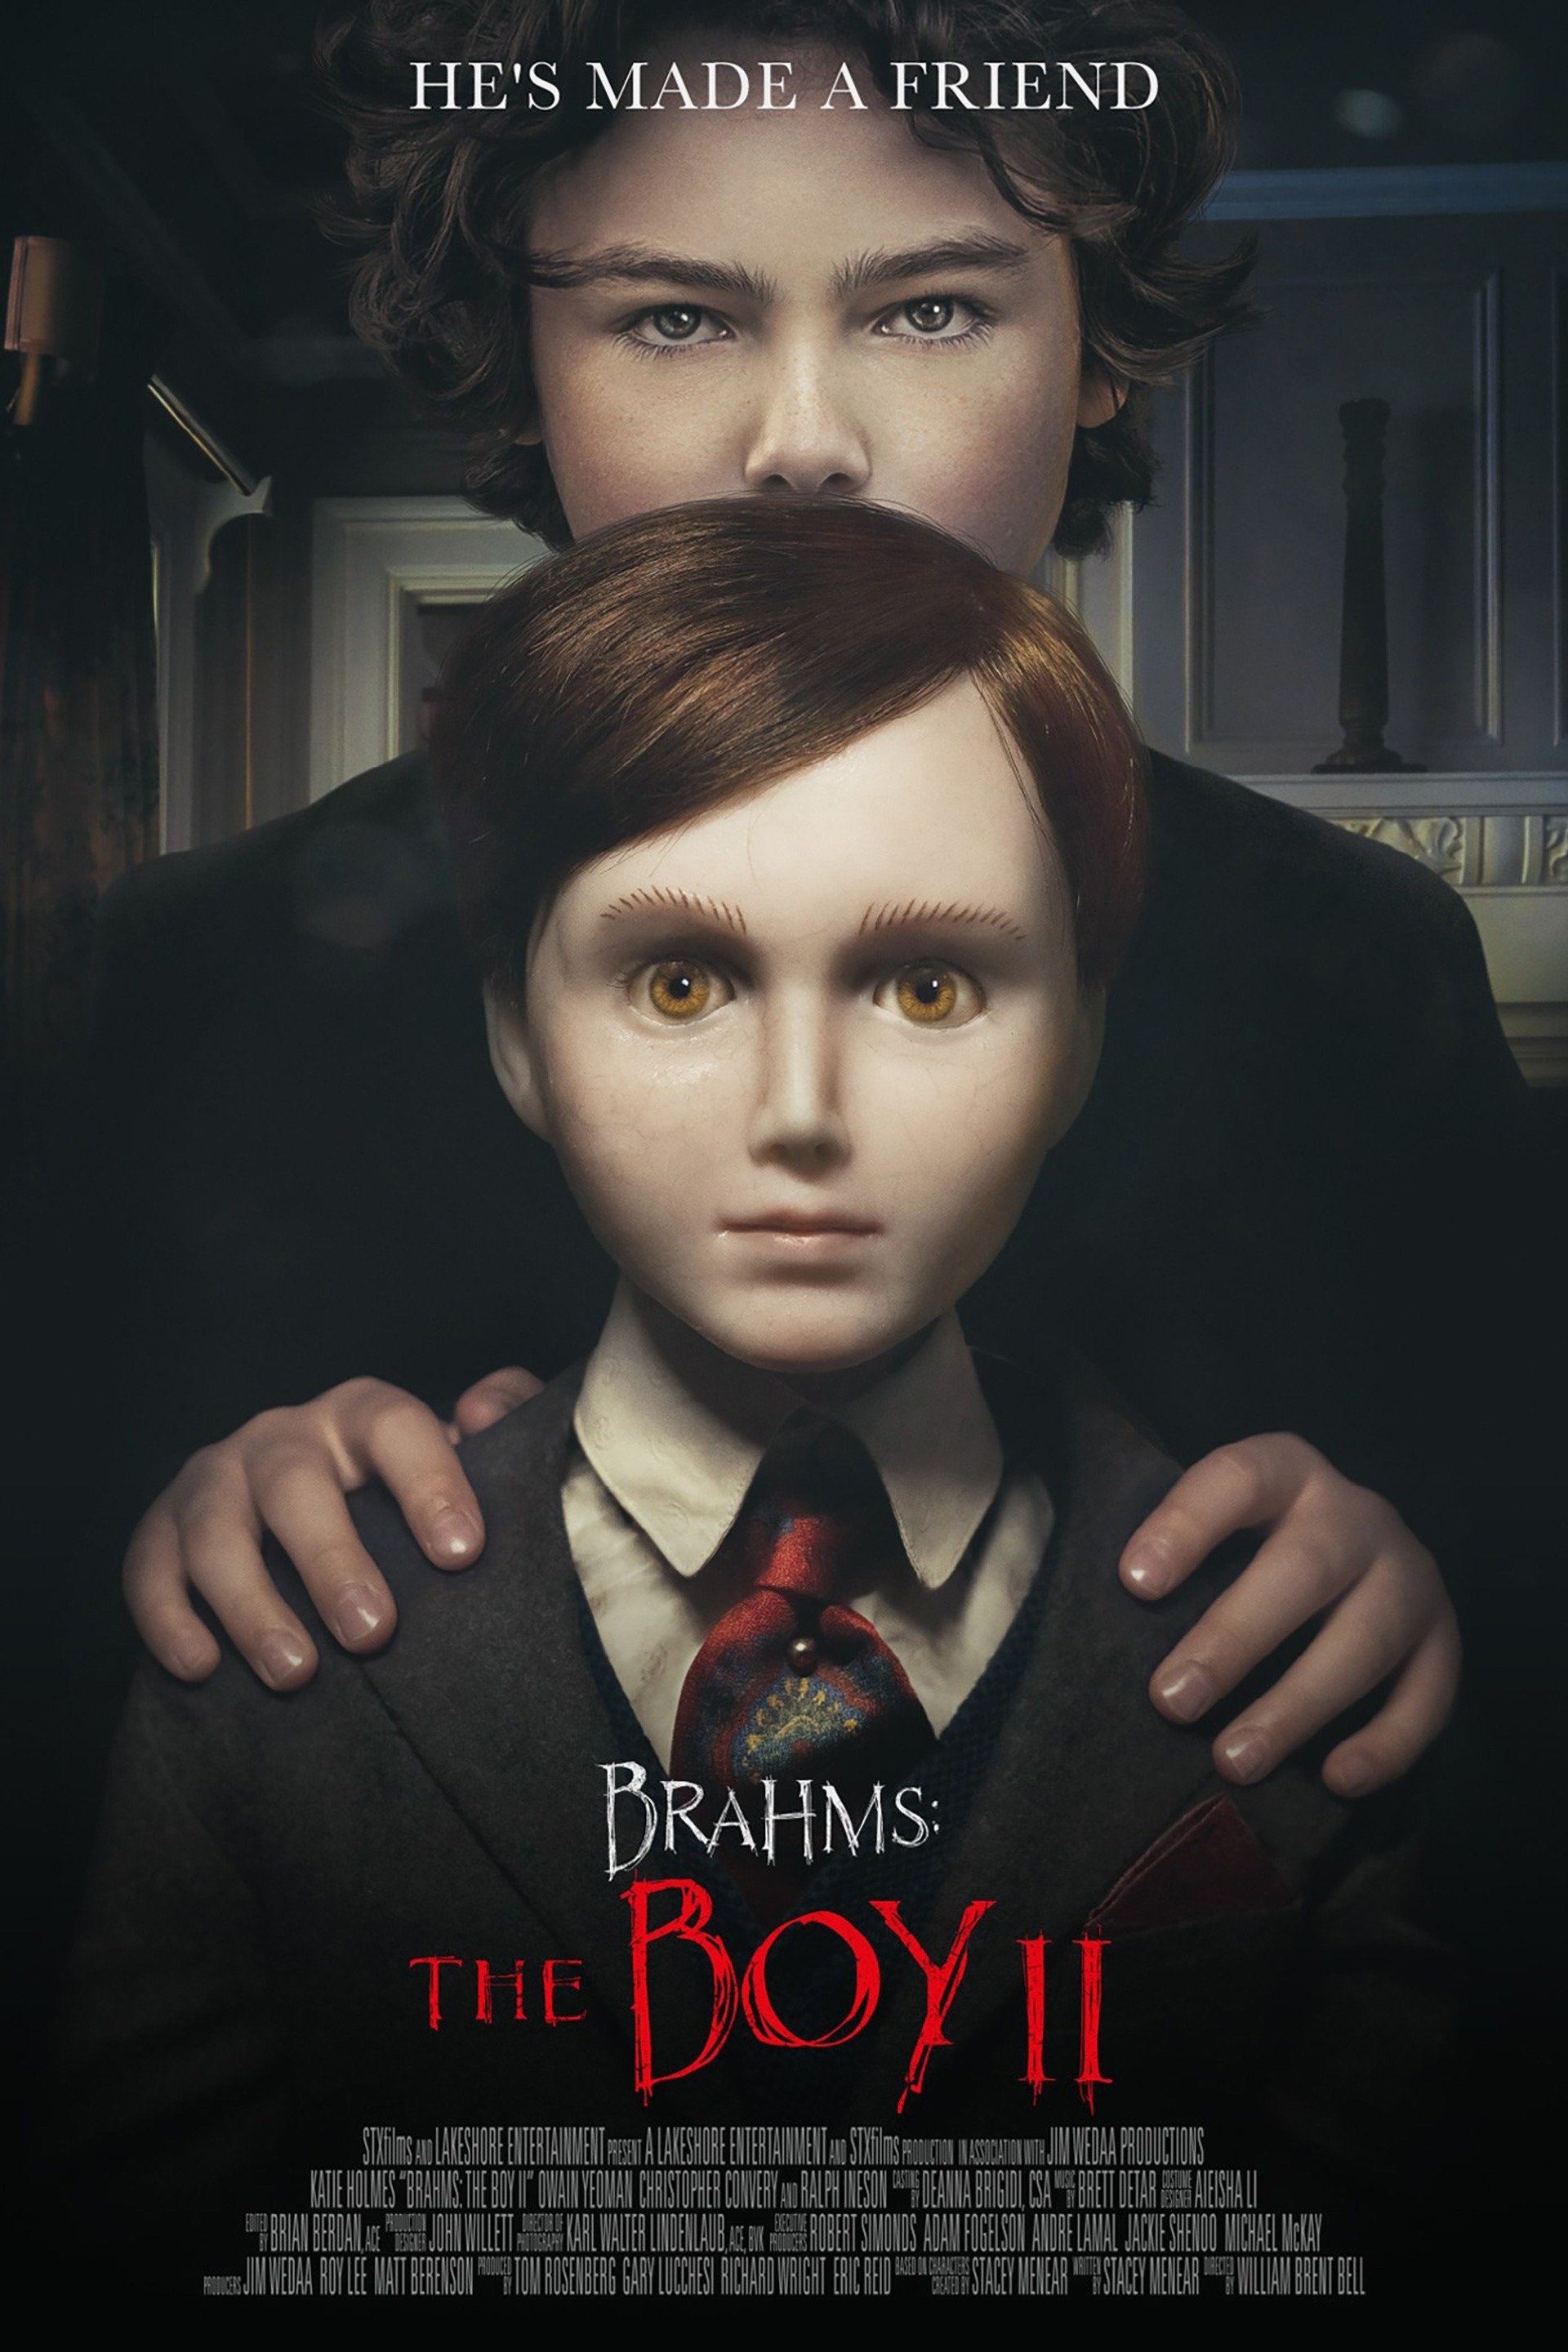 Brahms The Boy II William Brent Bell Mystery/Thriller Movie 2020A4 A3 A2 A1 